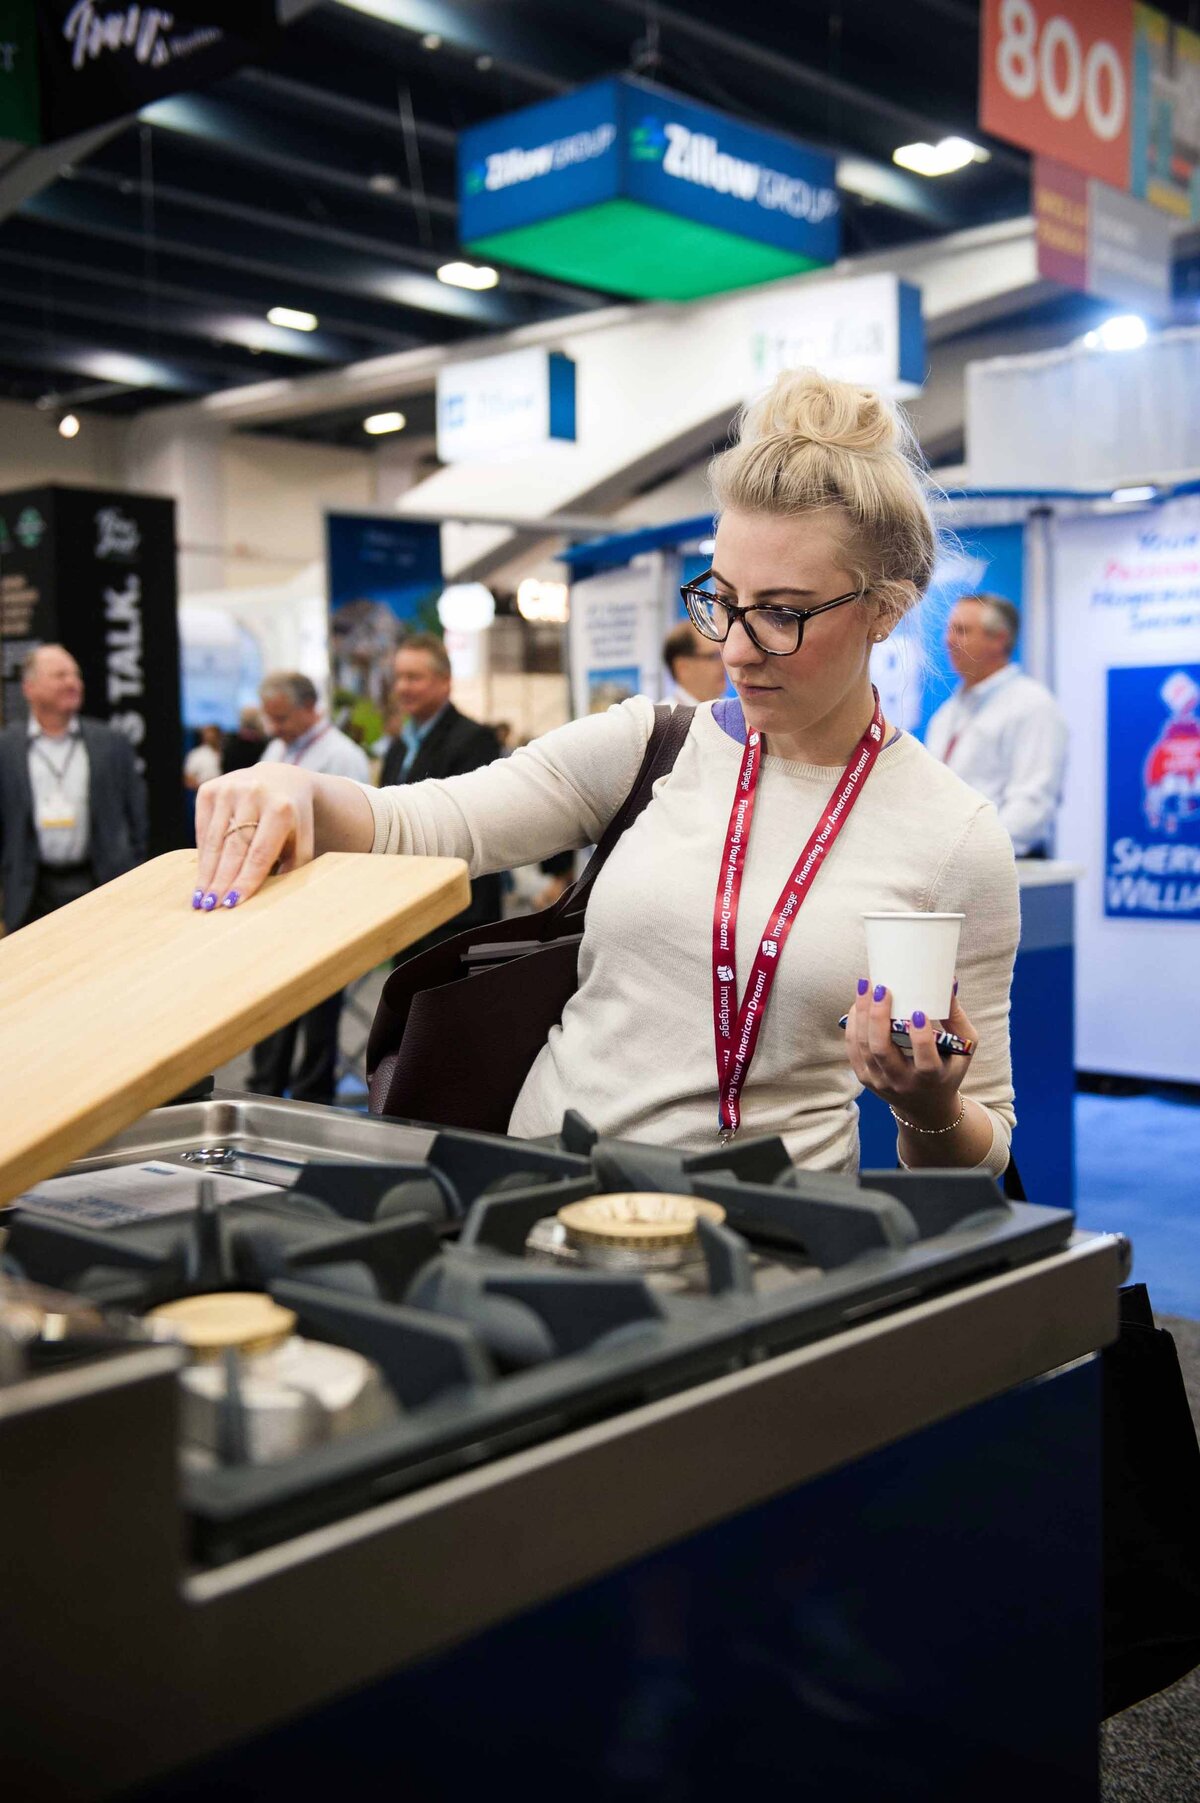 Women picks up a piece of a stovetop as she shops the showroom floor